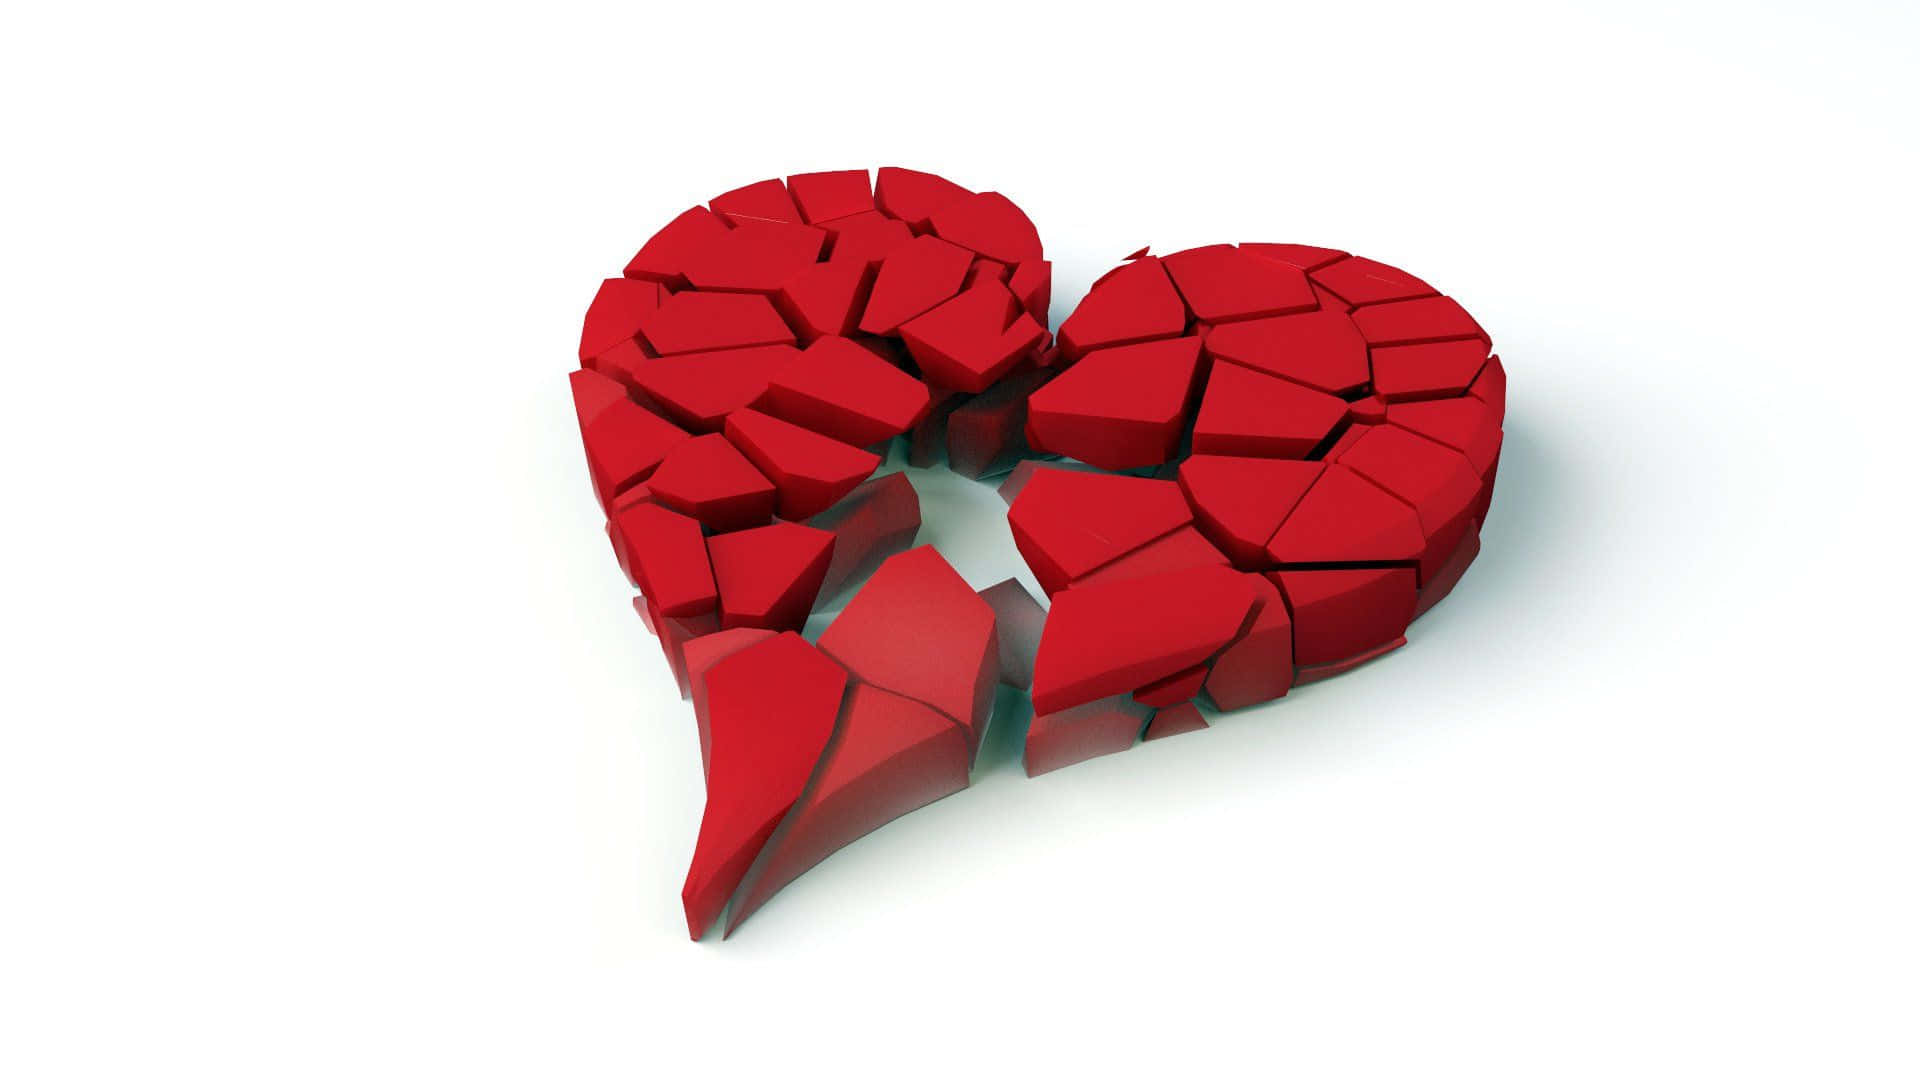 A Broken Heart On A White Background